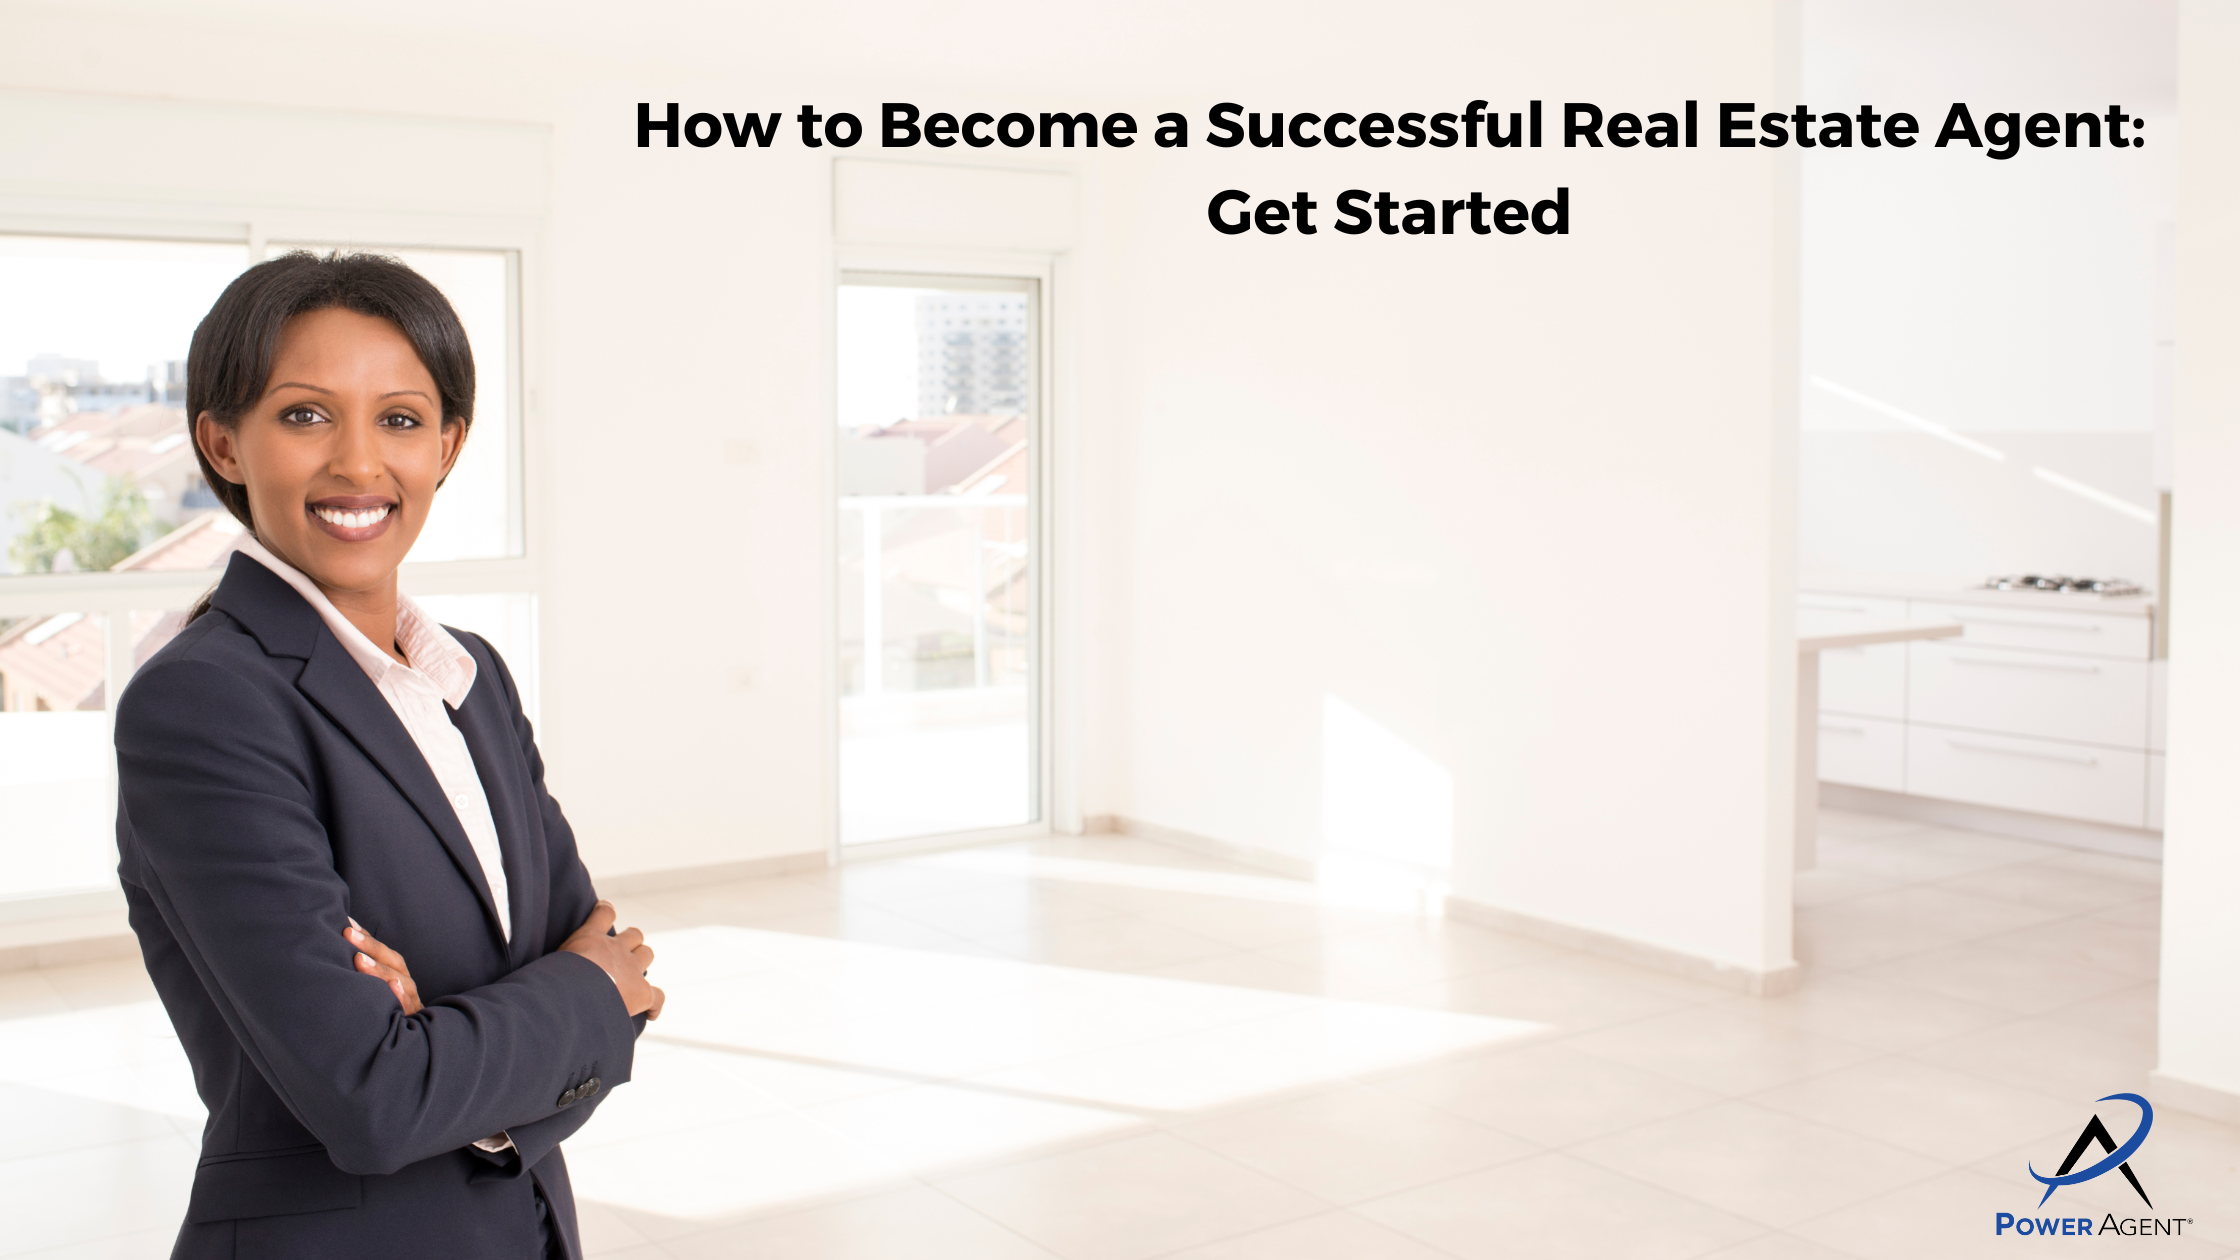 How to Become a Successful Real Estate Agent: Get Started